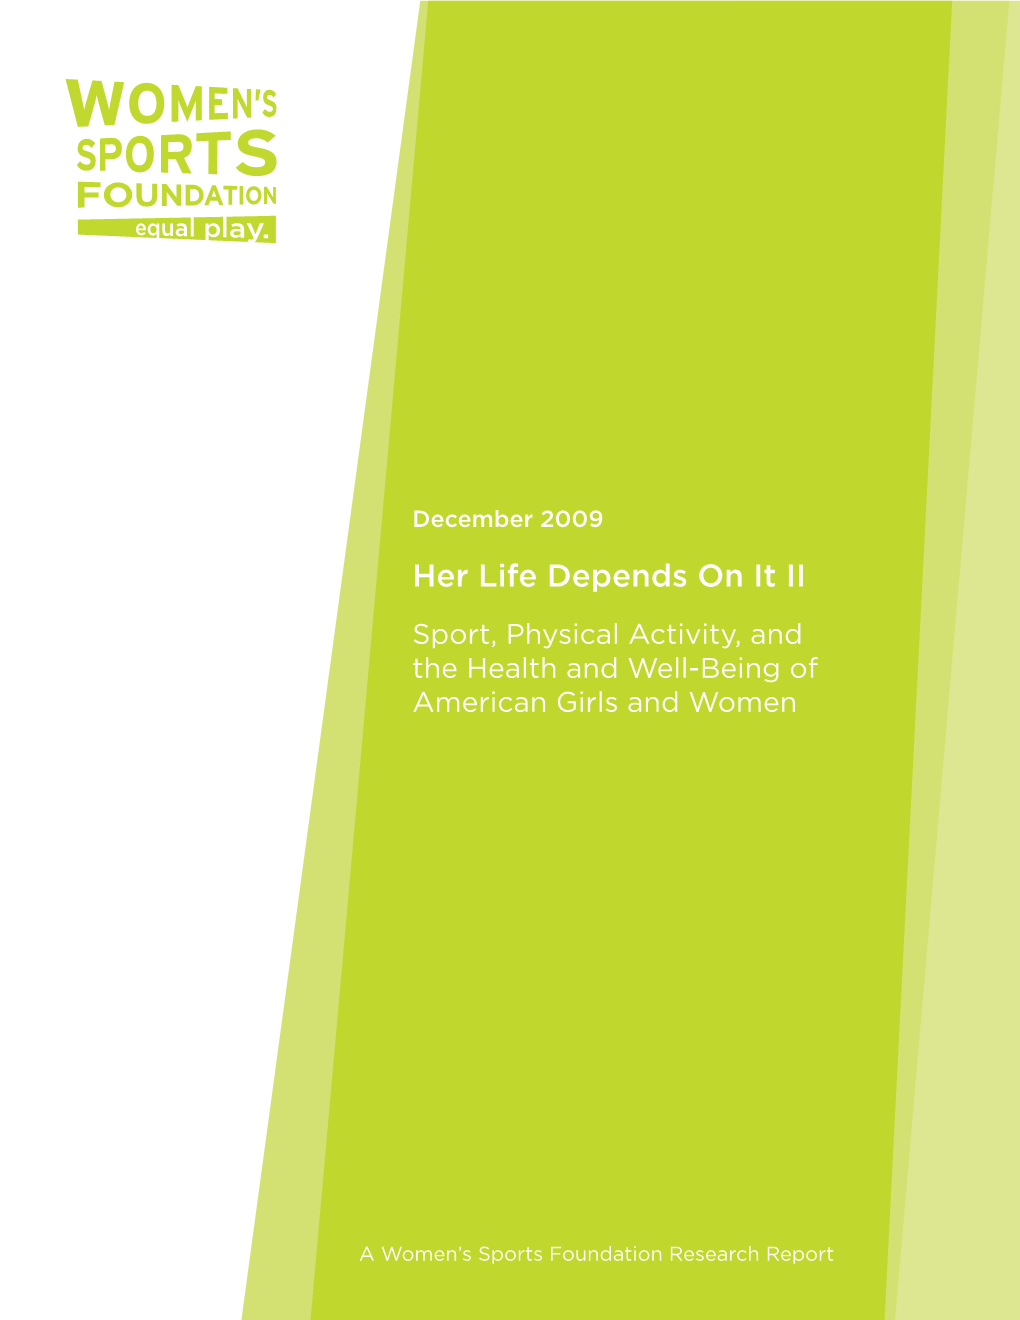 Her Life Depends on It II: Sport, Physical Activity, and the Health and Well-Being of American Girls and Women, Published by the Women’S Sports Foundation